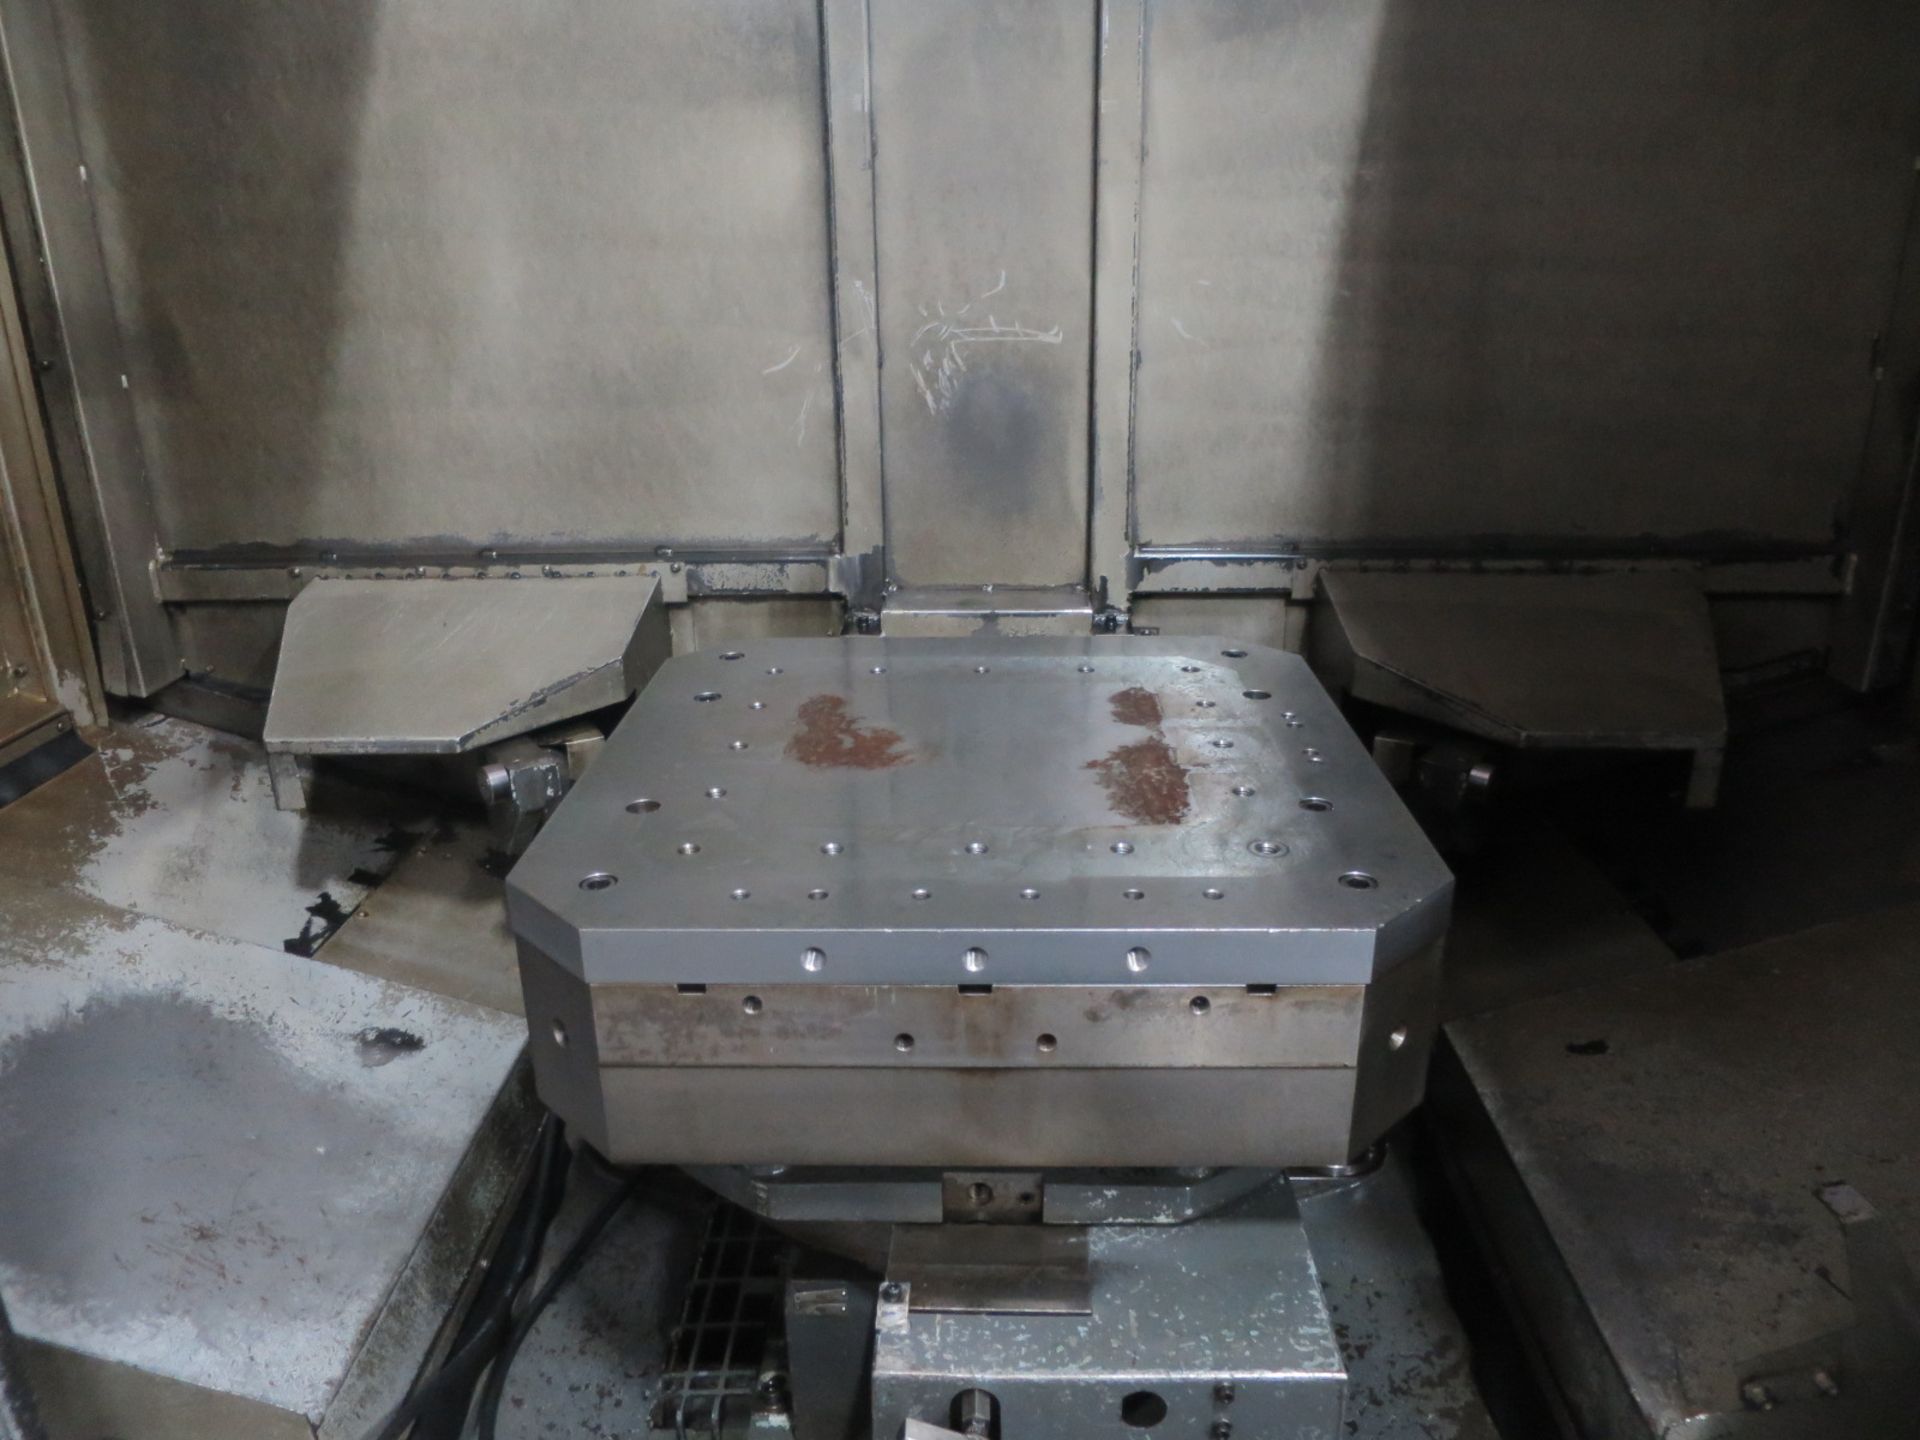 24.8 X 24.8 Pallets Toyoda FH630SX CNC 4-Axis Horizontal Machining Center, S/N NS1429, New 12/2005 - Image 7 of 14